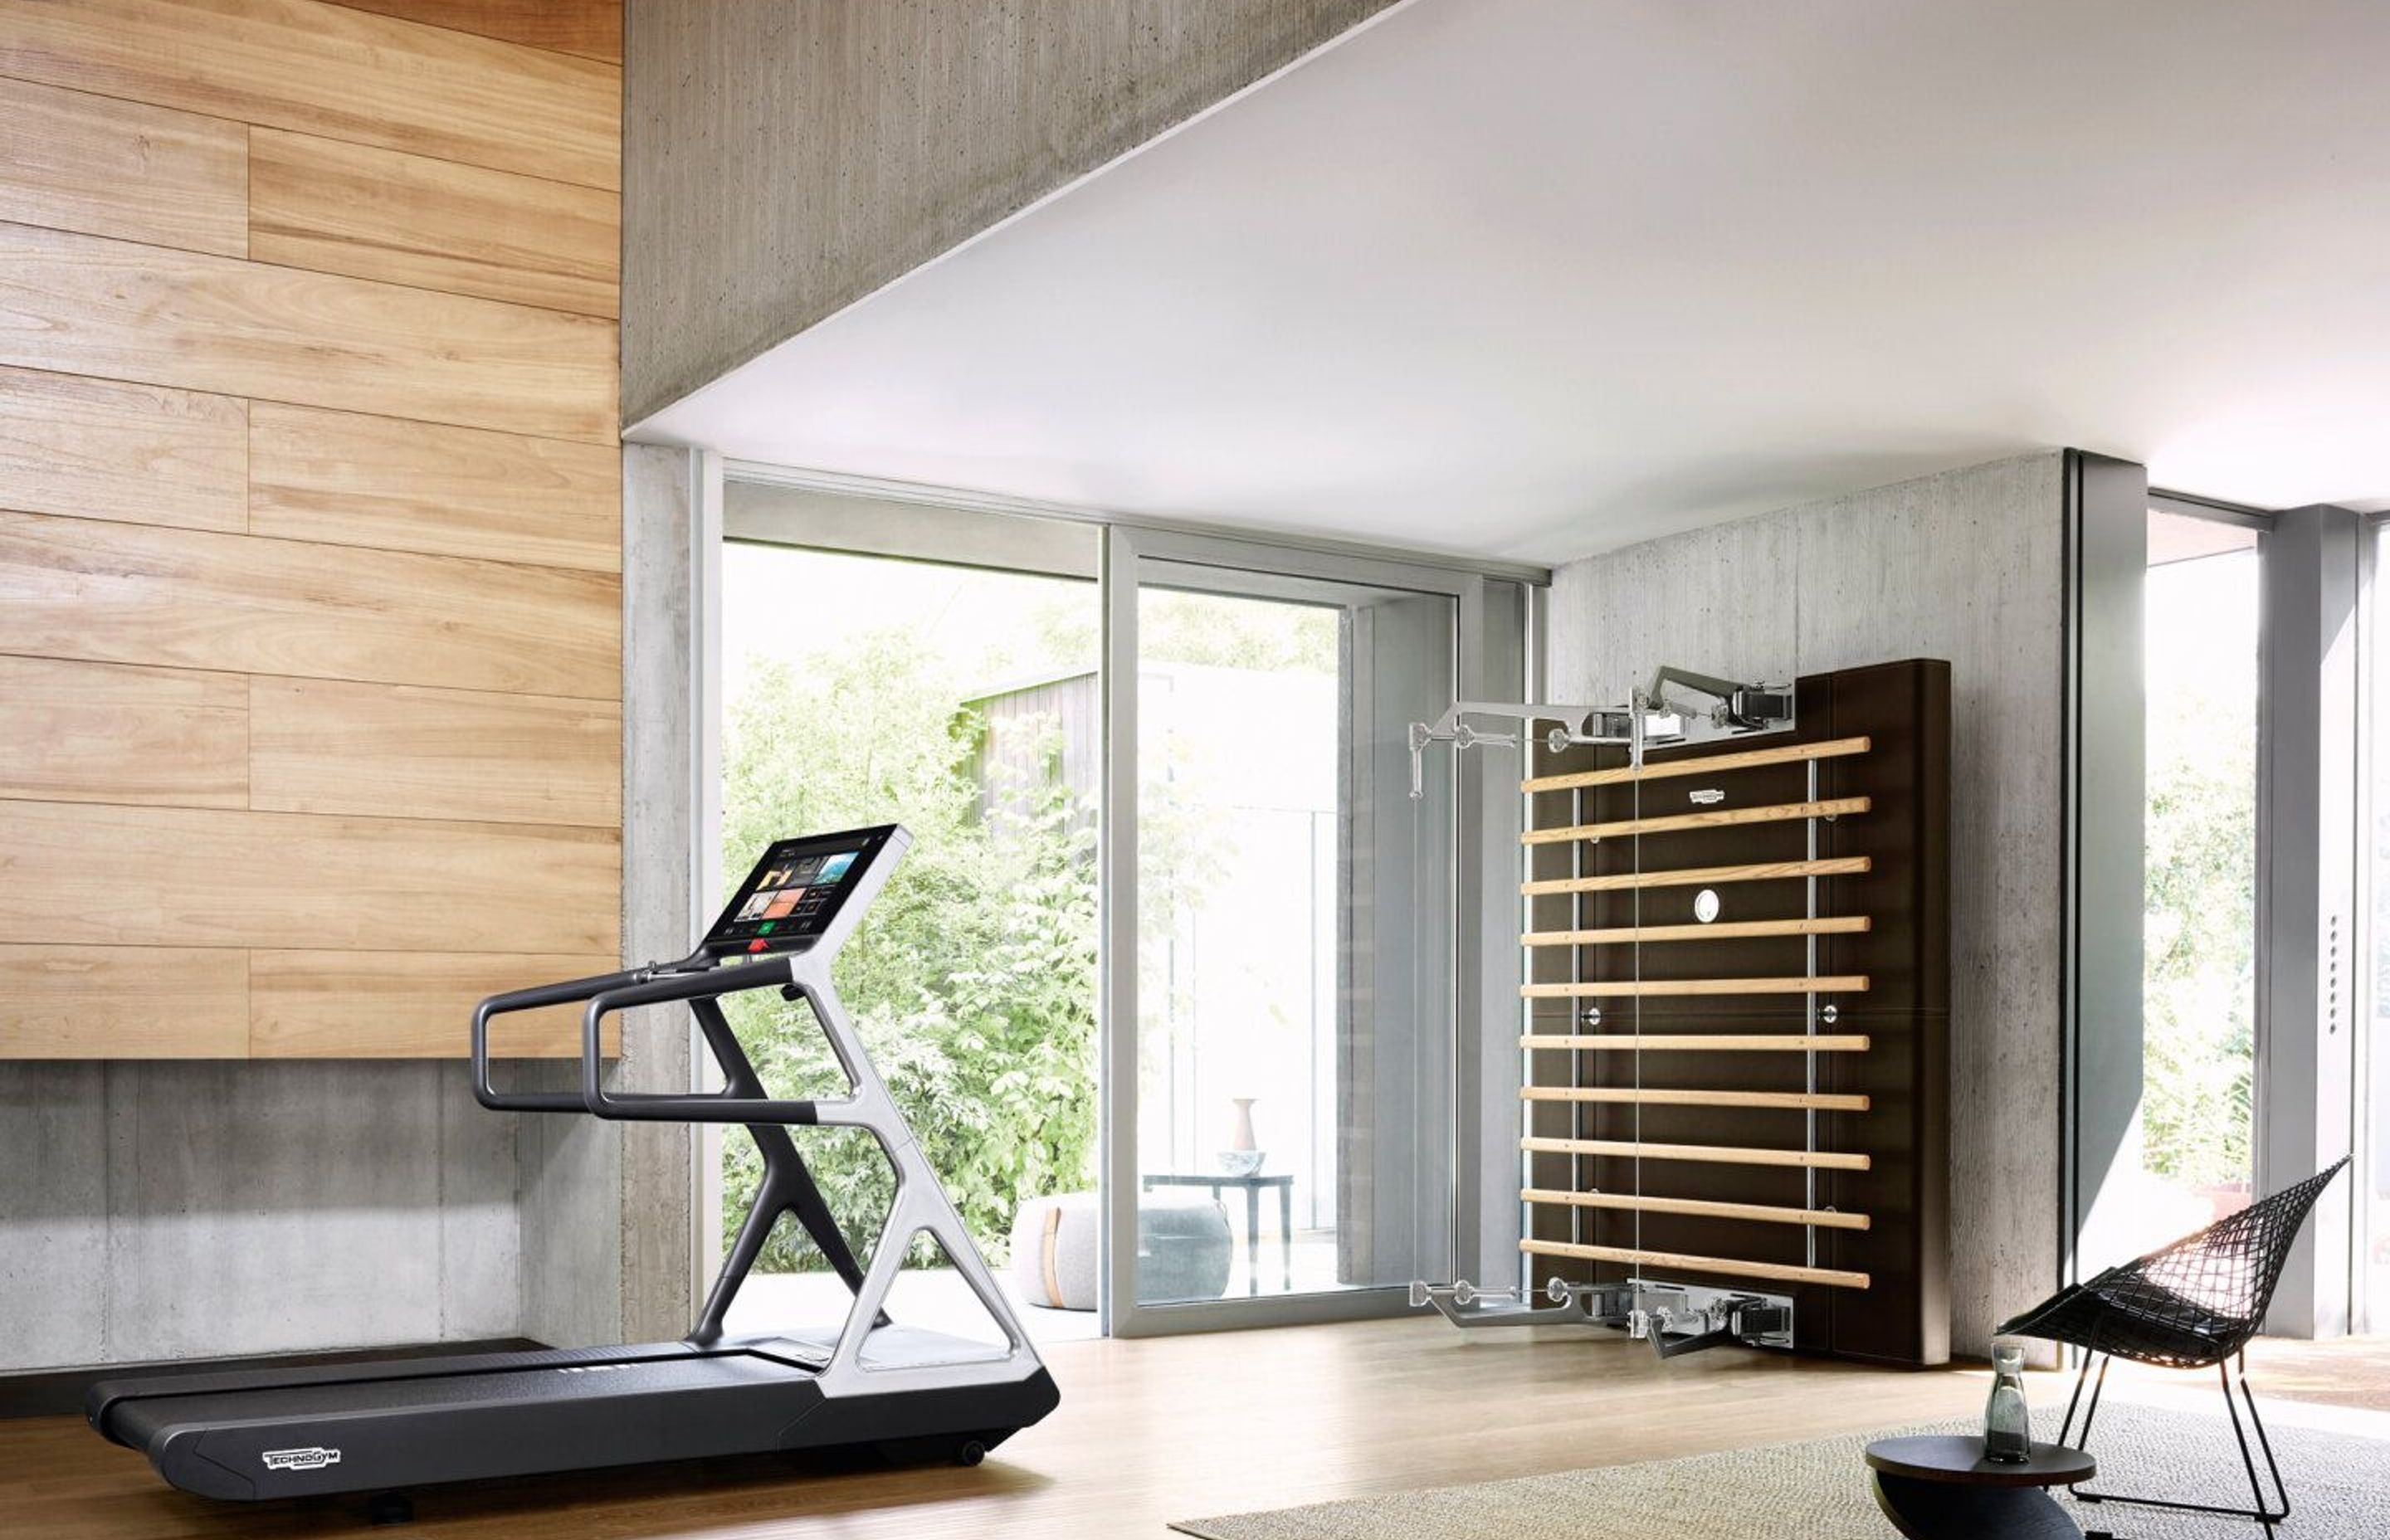 Customising your own workout space is the ideal way to achieve your health, strength and fitness goals.